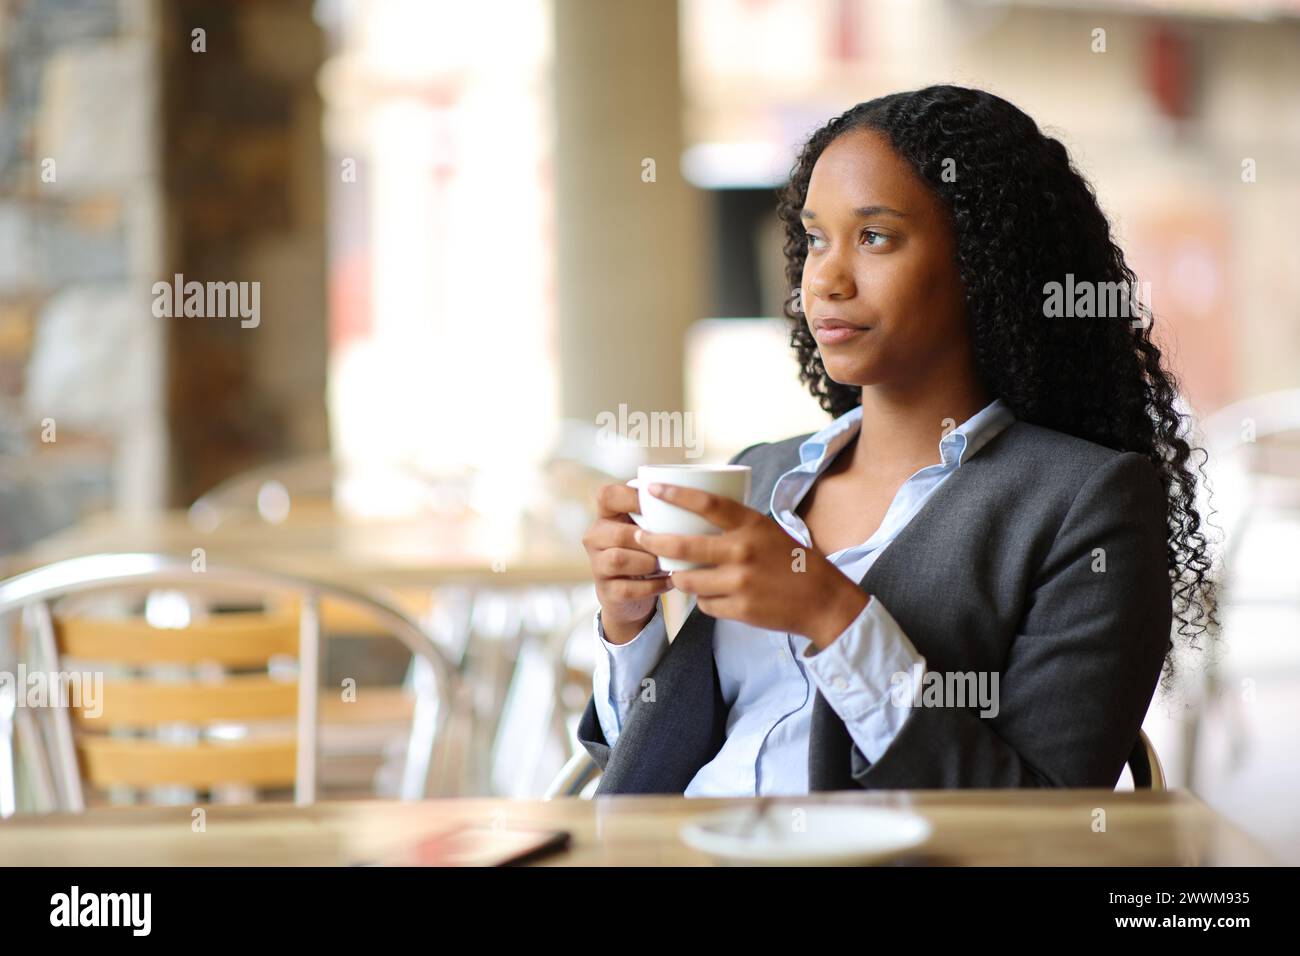 Relaxed black executive drinking coffee contemplating in a restaurant terrace Stock Photo